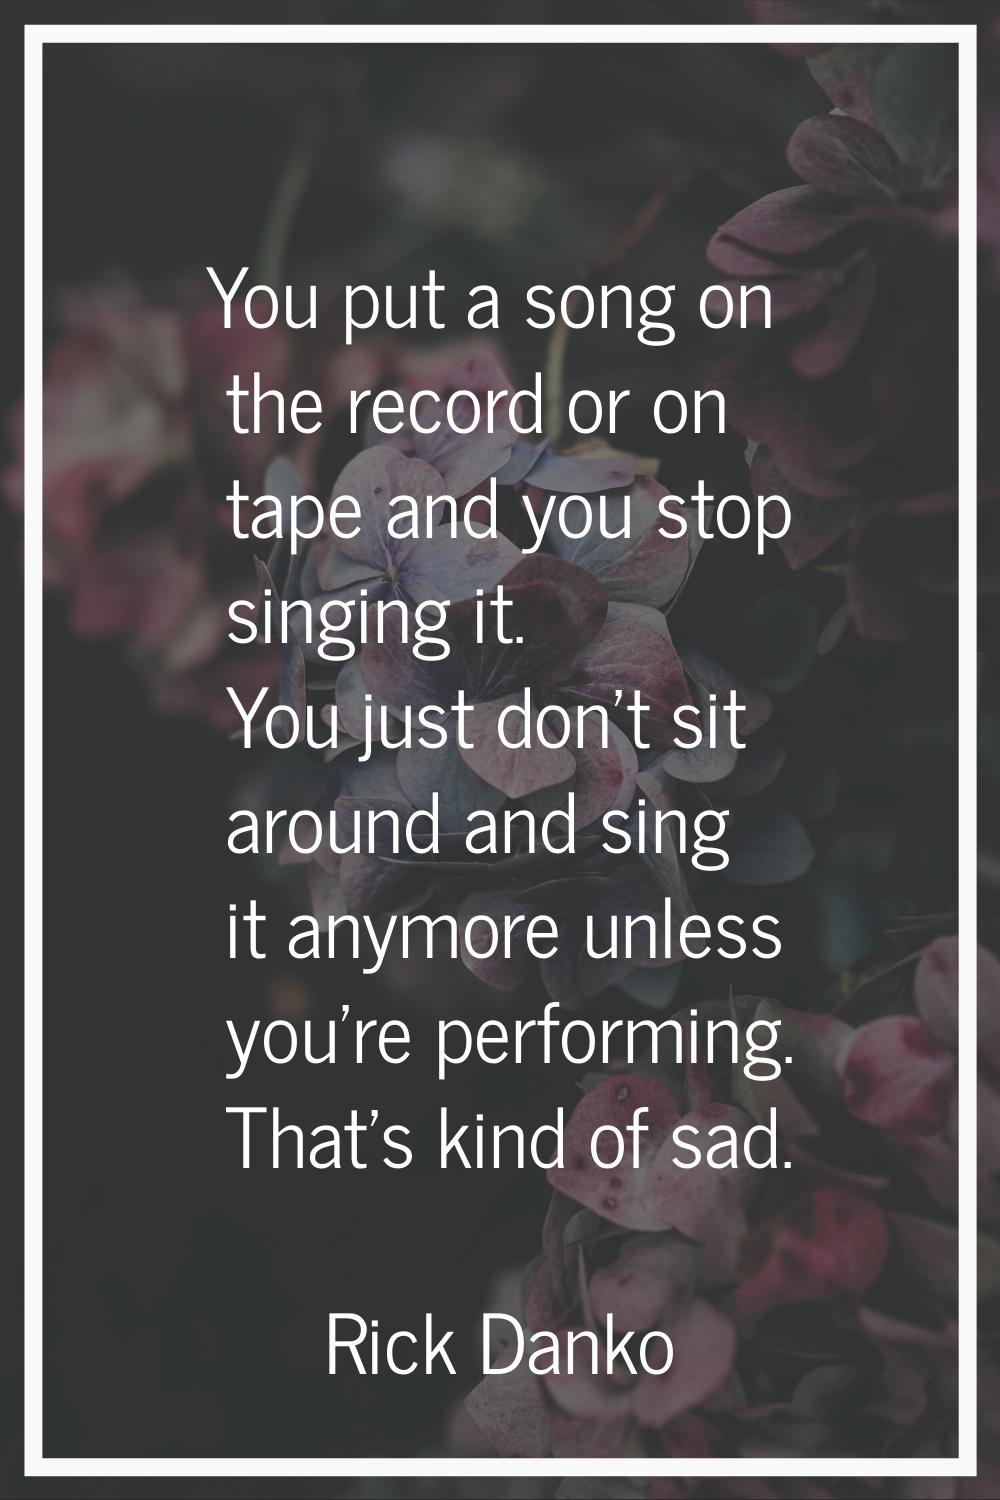 You put a song on the record or on tape and you stop singing it. You just don't sit around and sing